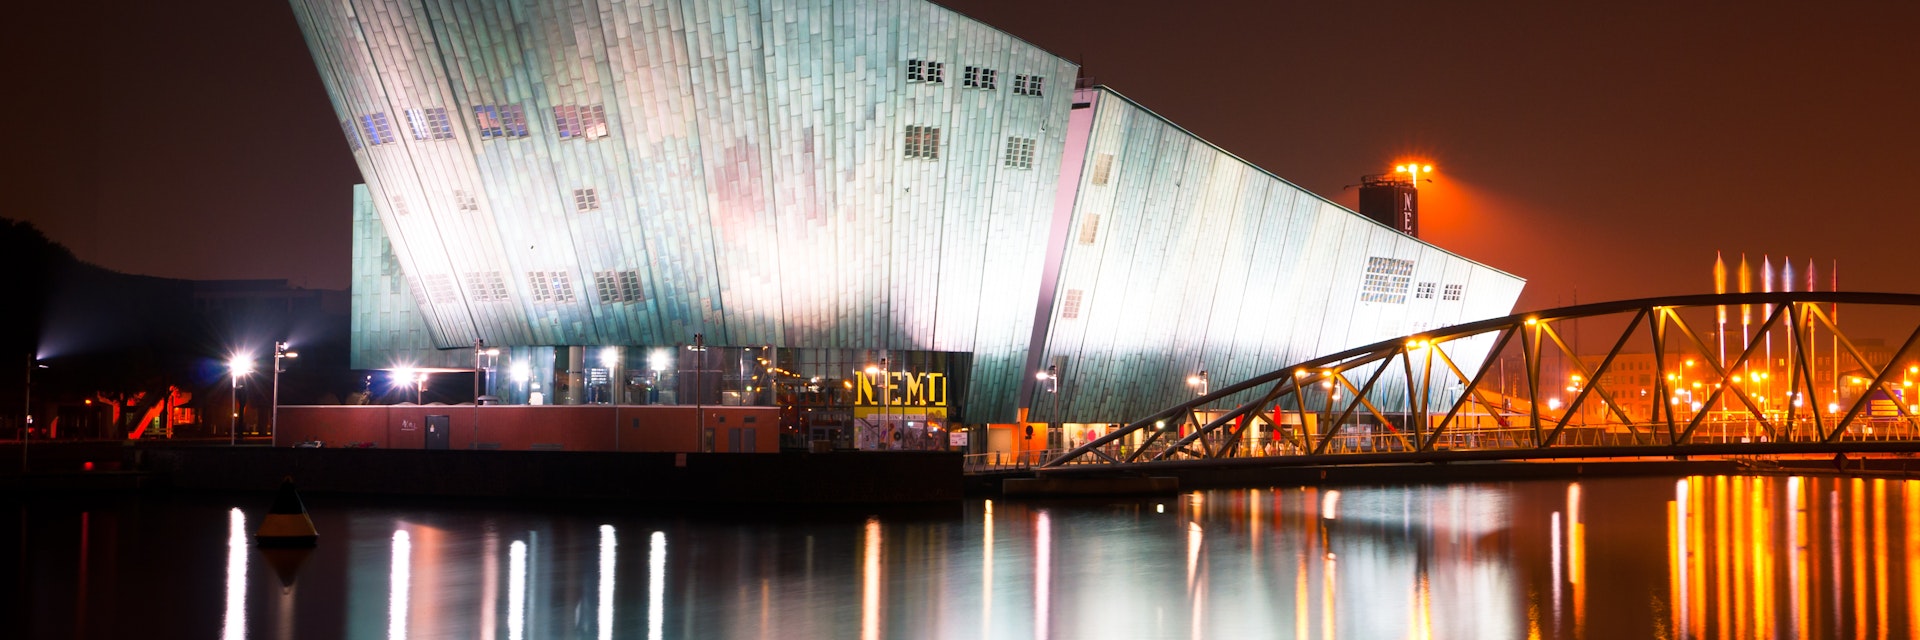 AMSTERDAM, NETHERLANDS - JULY 27: The Nemo Museum at night on July 27, 2013 in Amsterdam, Netherlands. Science Center NEMO is designed by Renzo Piano since 1997.; Shutterstock ID 162619127; Your name (First / Last): Josh Vogel; Project no. or GL code: 56530; Network activity no. or Cost Centre: Online-Design; Product or Project: 65050/7529/Josh Vogel/LP.com Destination Galleries